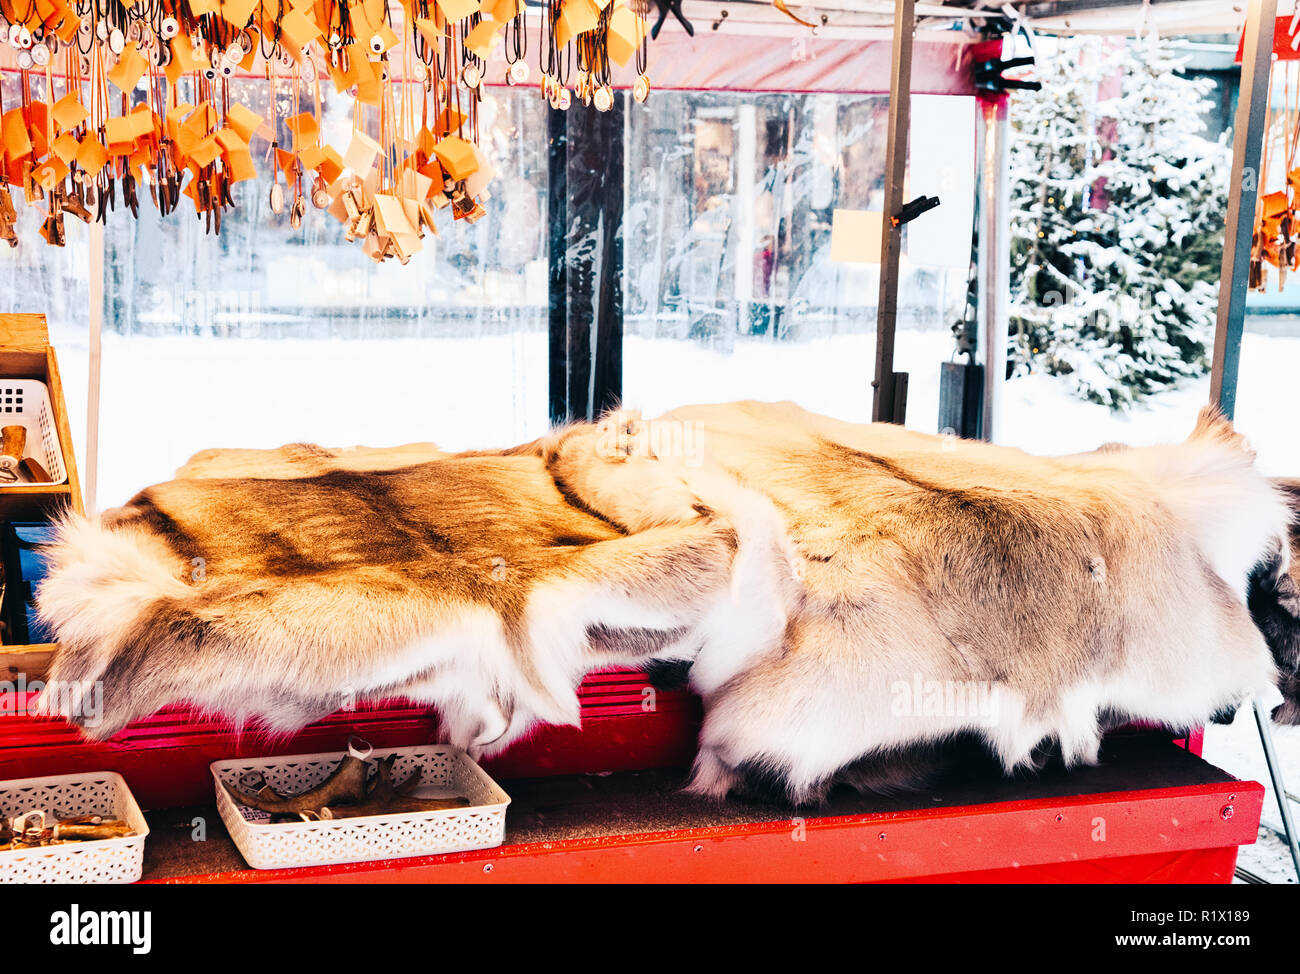 Winter Saami Souvenirs such as reindeer fur and horns in Finland in Lapland in winter. Stock Photo